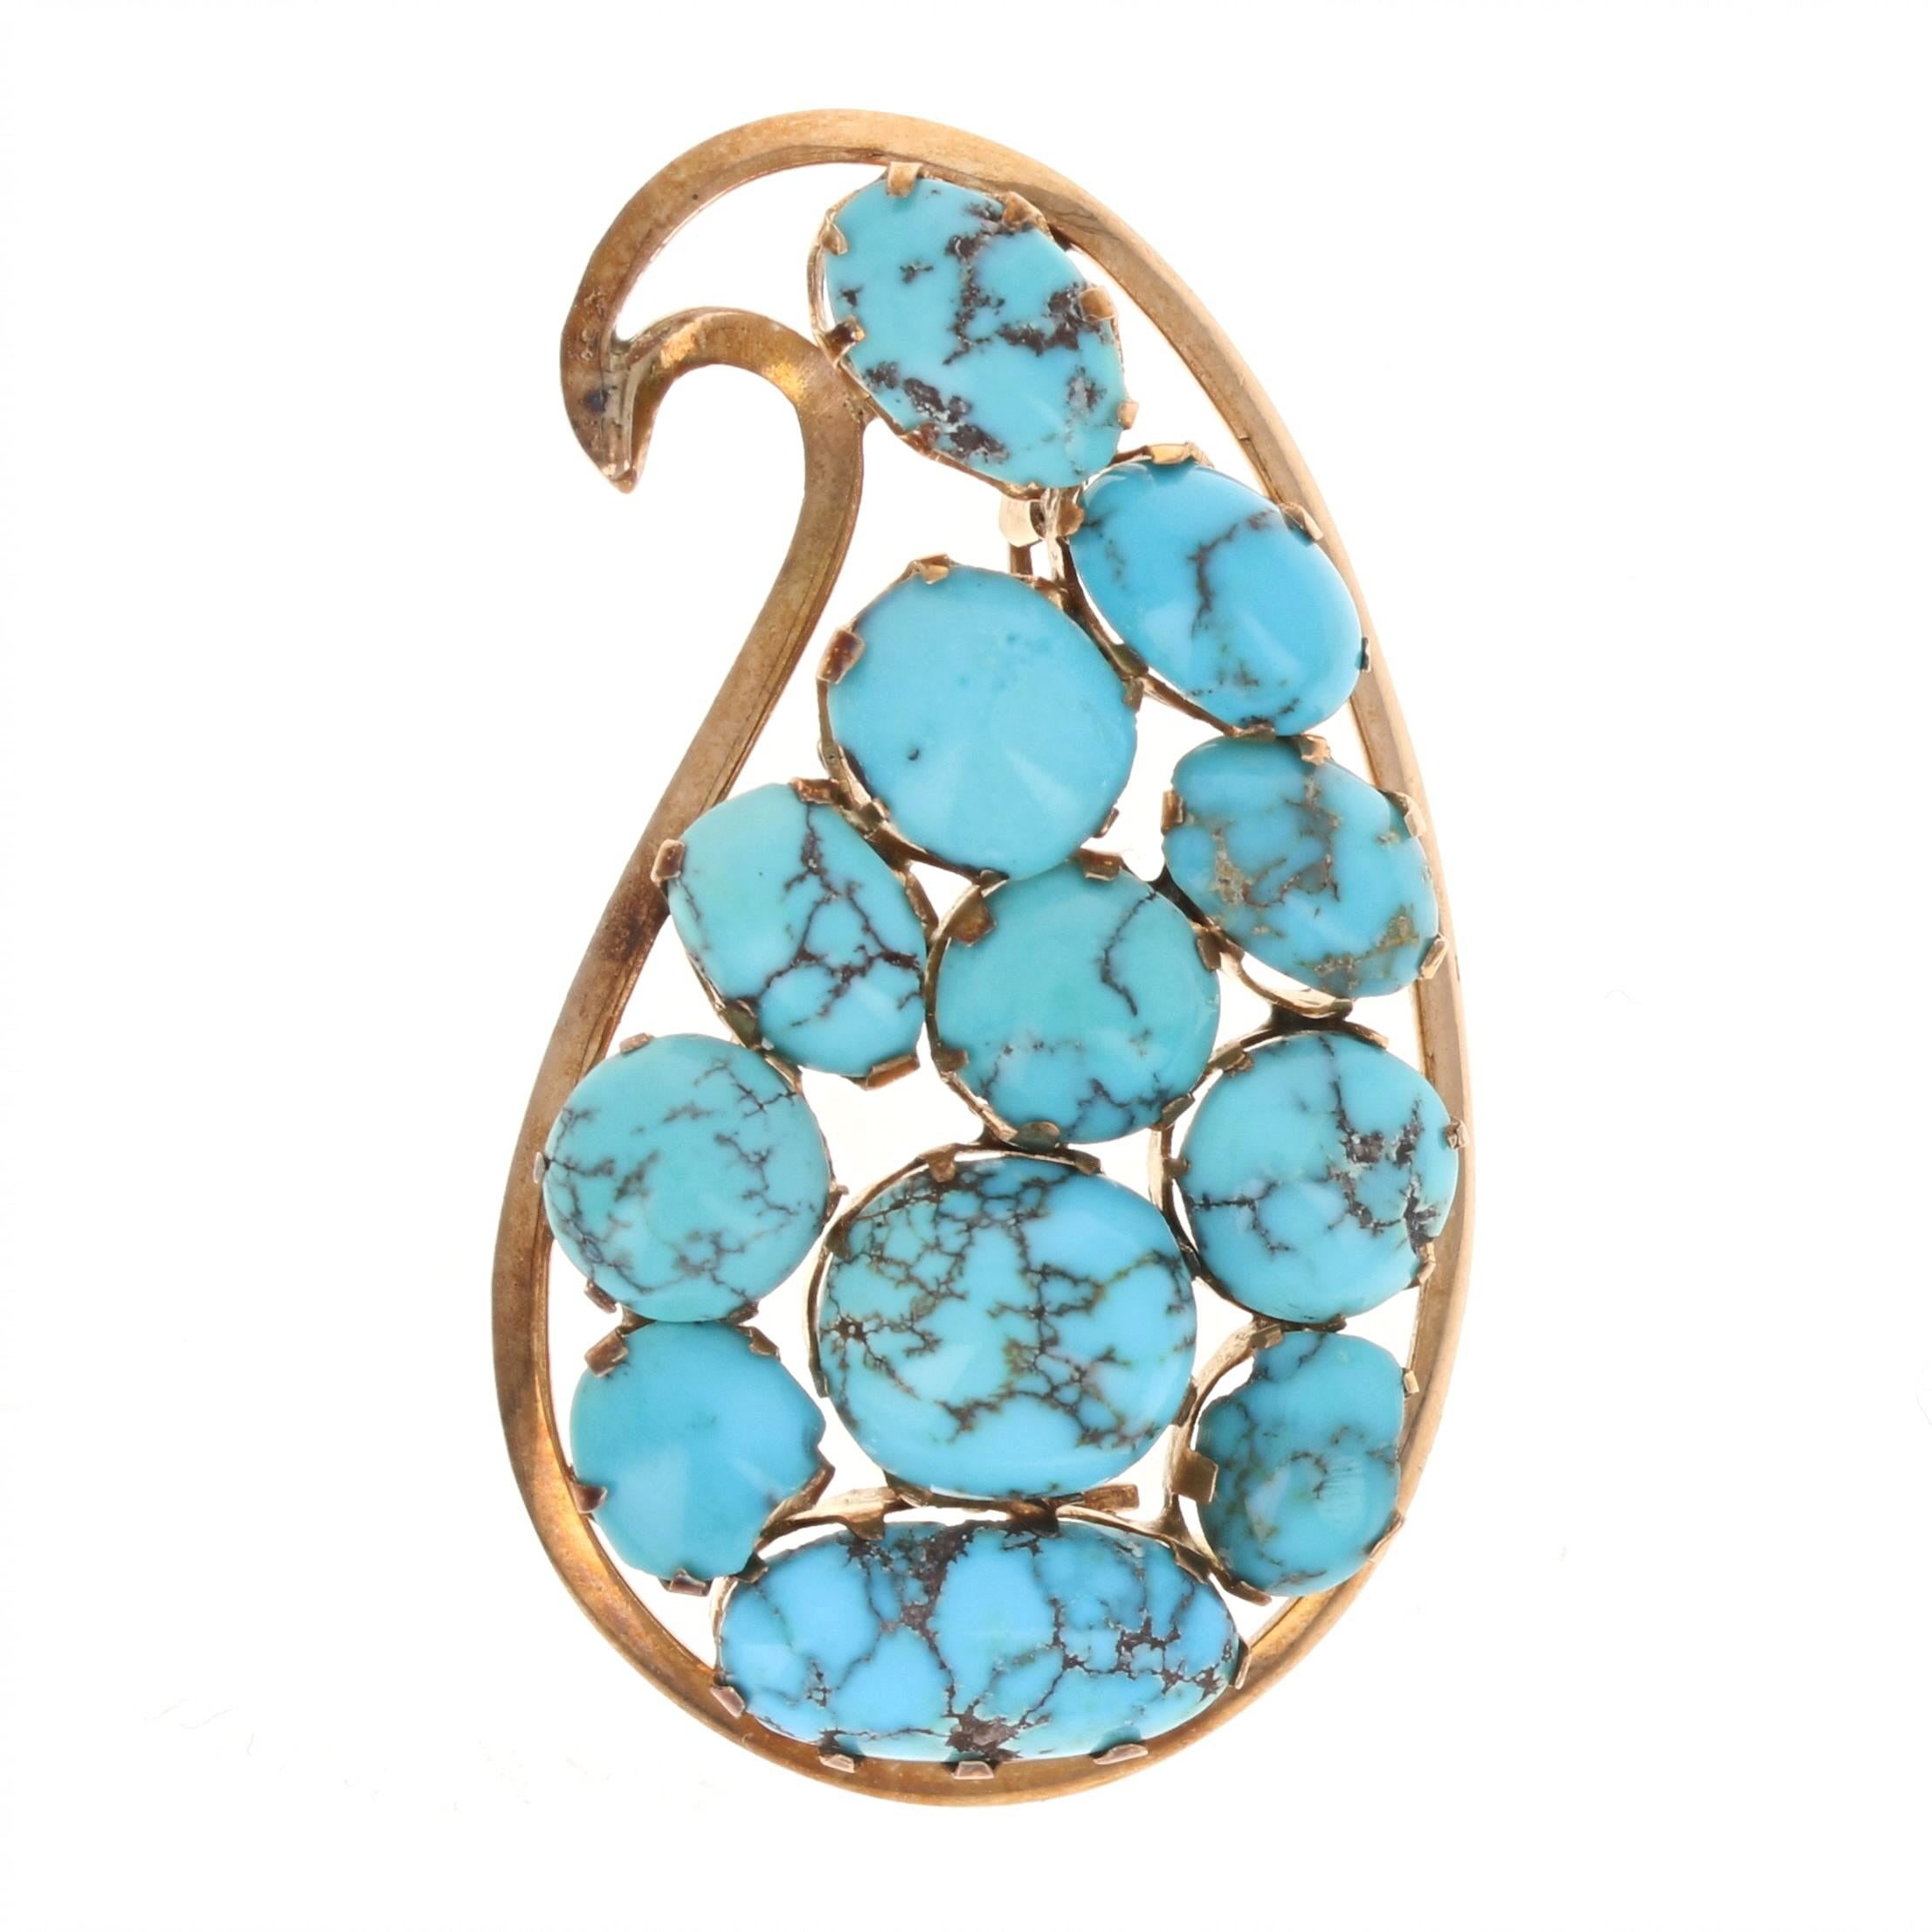 Metal Content: Guaranteed 12k Gold as tested

Stone Information:
Genuine Turquoise with Matrix - 
Treatment: Routinely Enhanced
Cuts: Round Cabochon & Oval Cabochon

Measurements: 1 13/16